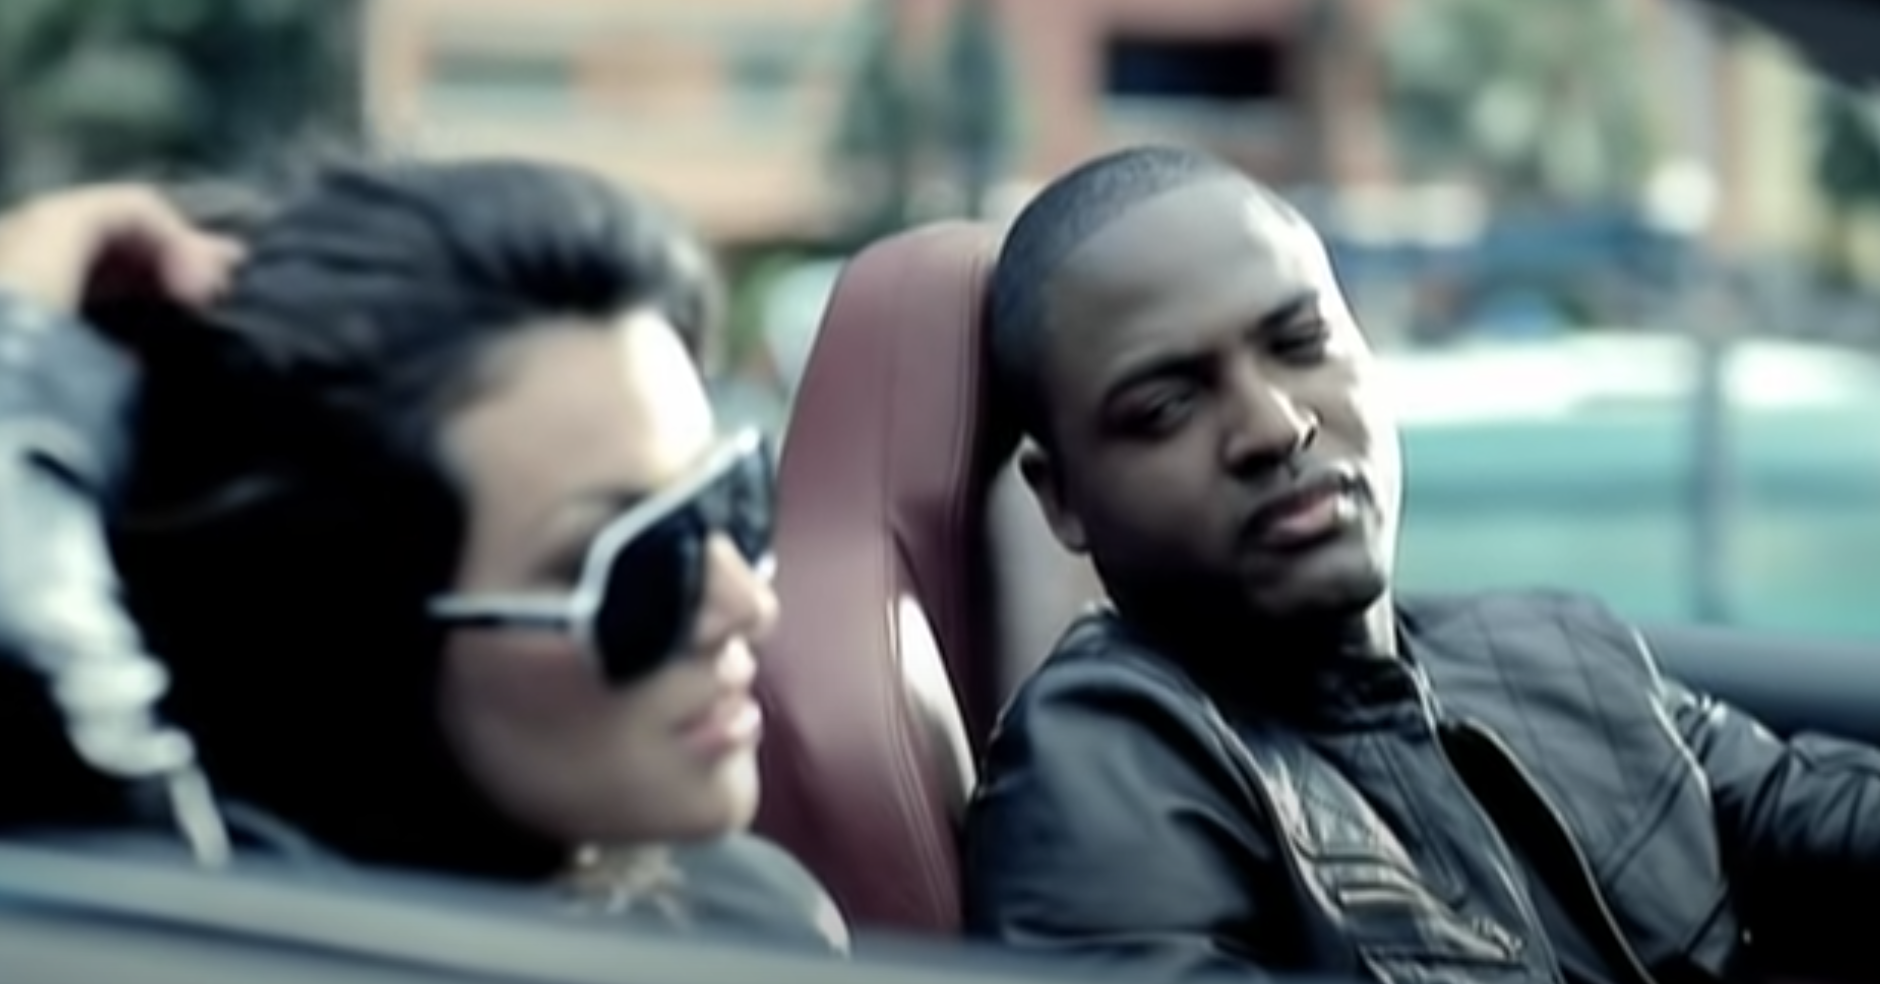 Taio Cruz looks at his love interest in the video for "Break Your Heart"